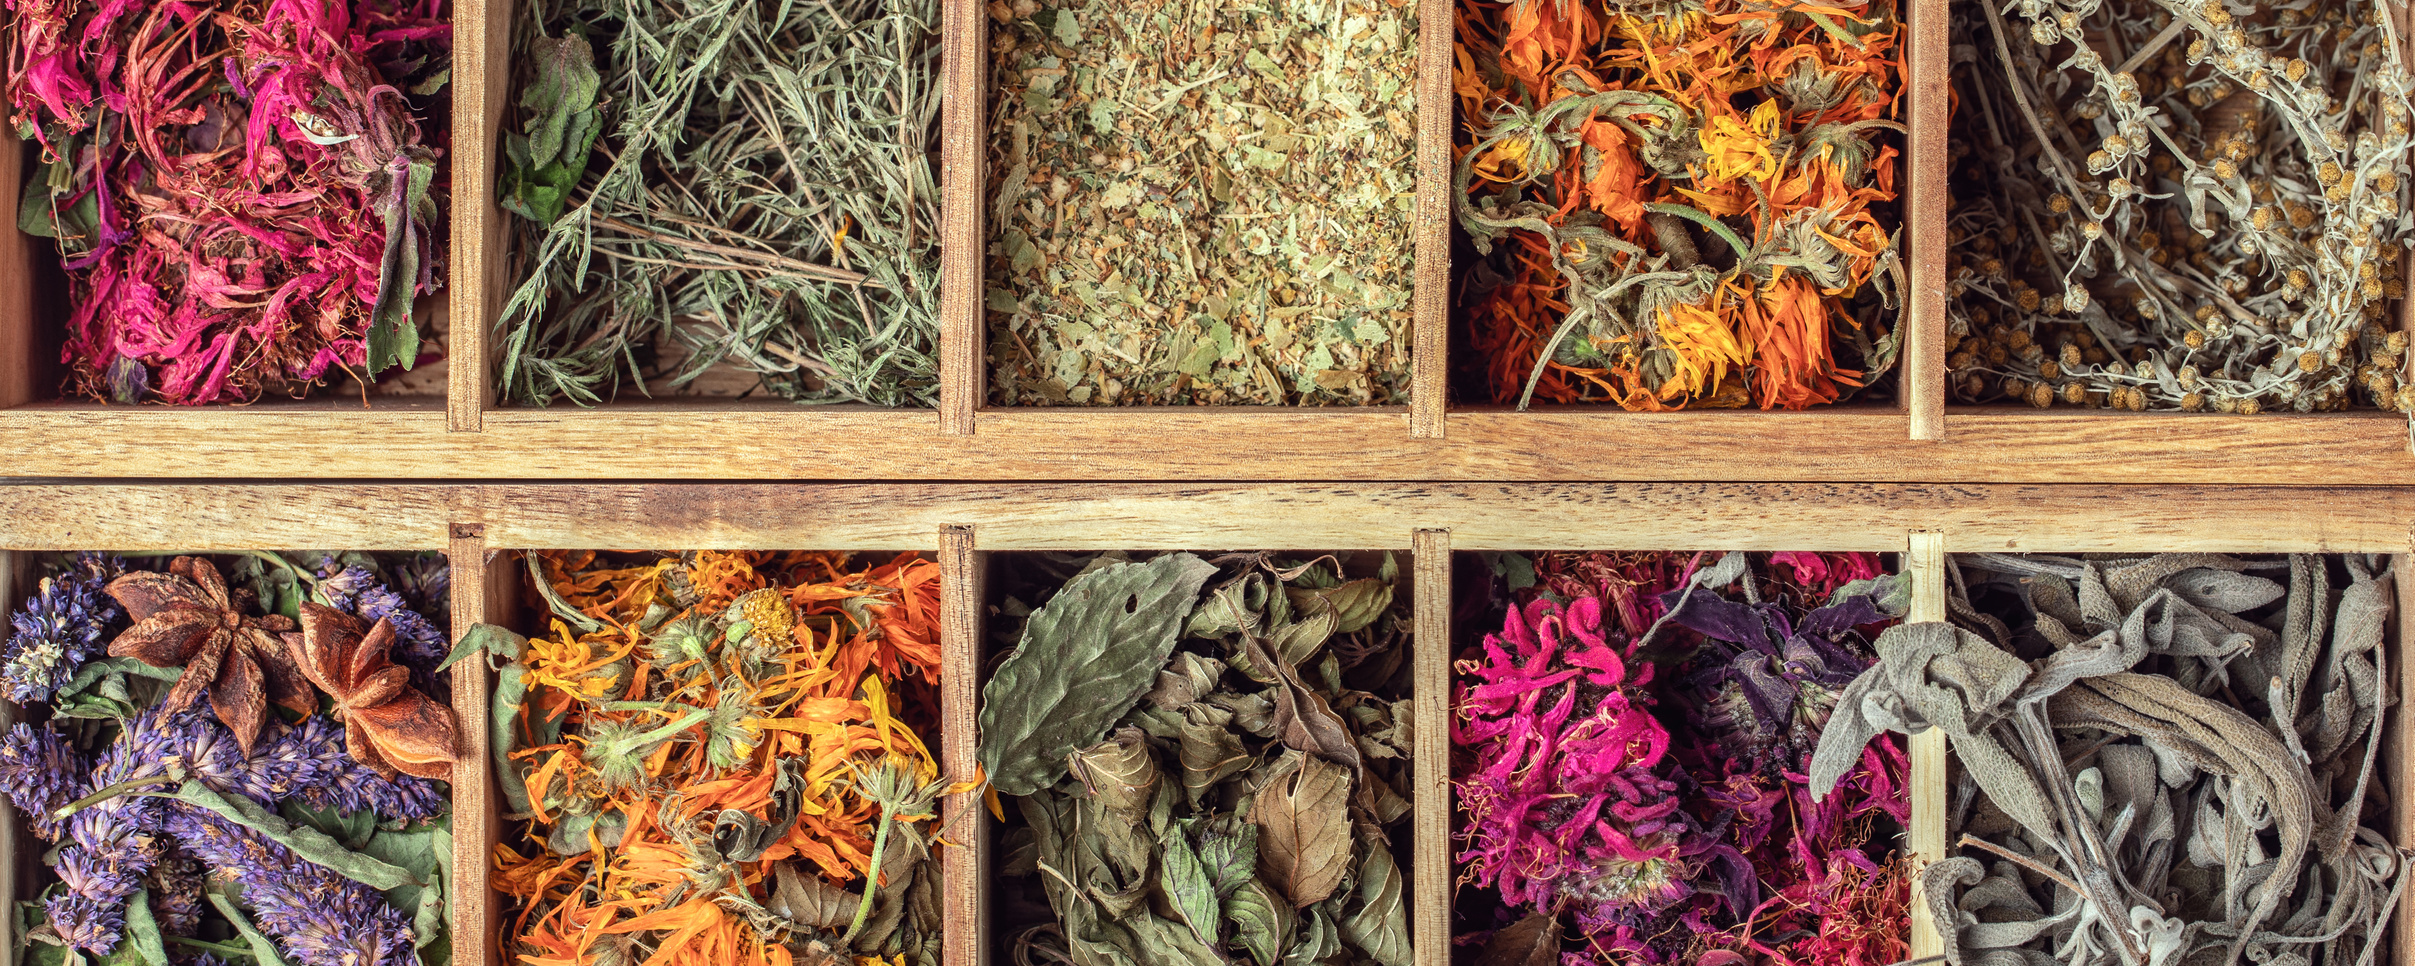 Assortment of Dried Tea Herbs in Wooden Boxes